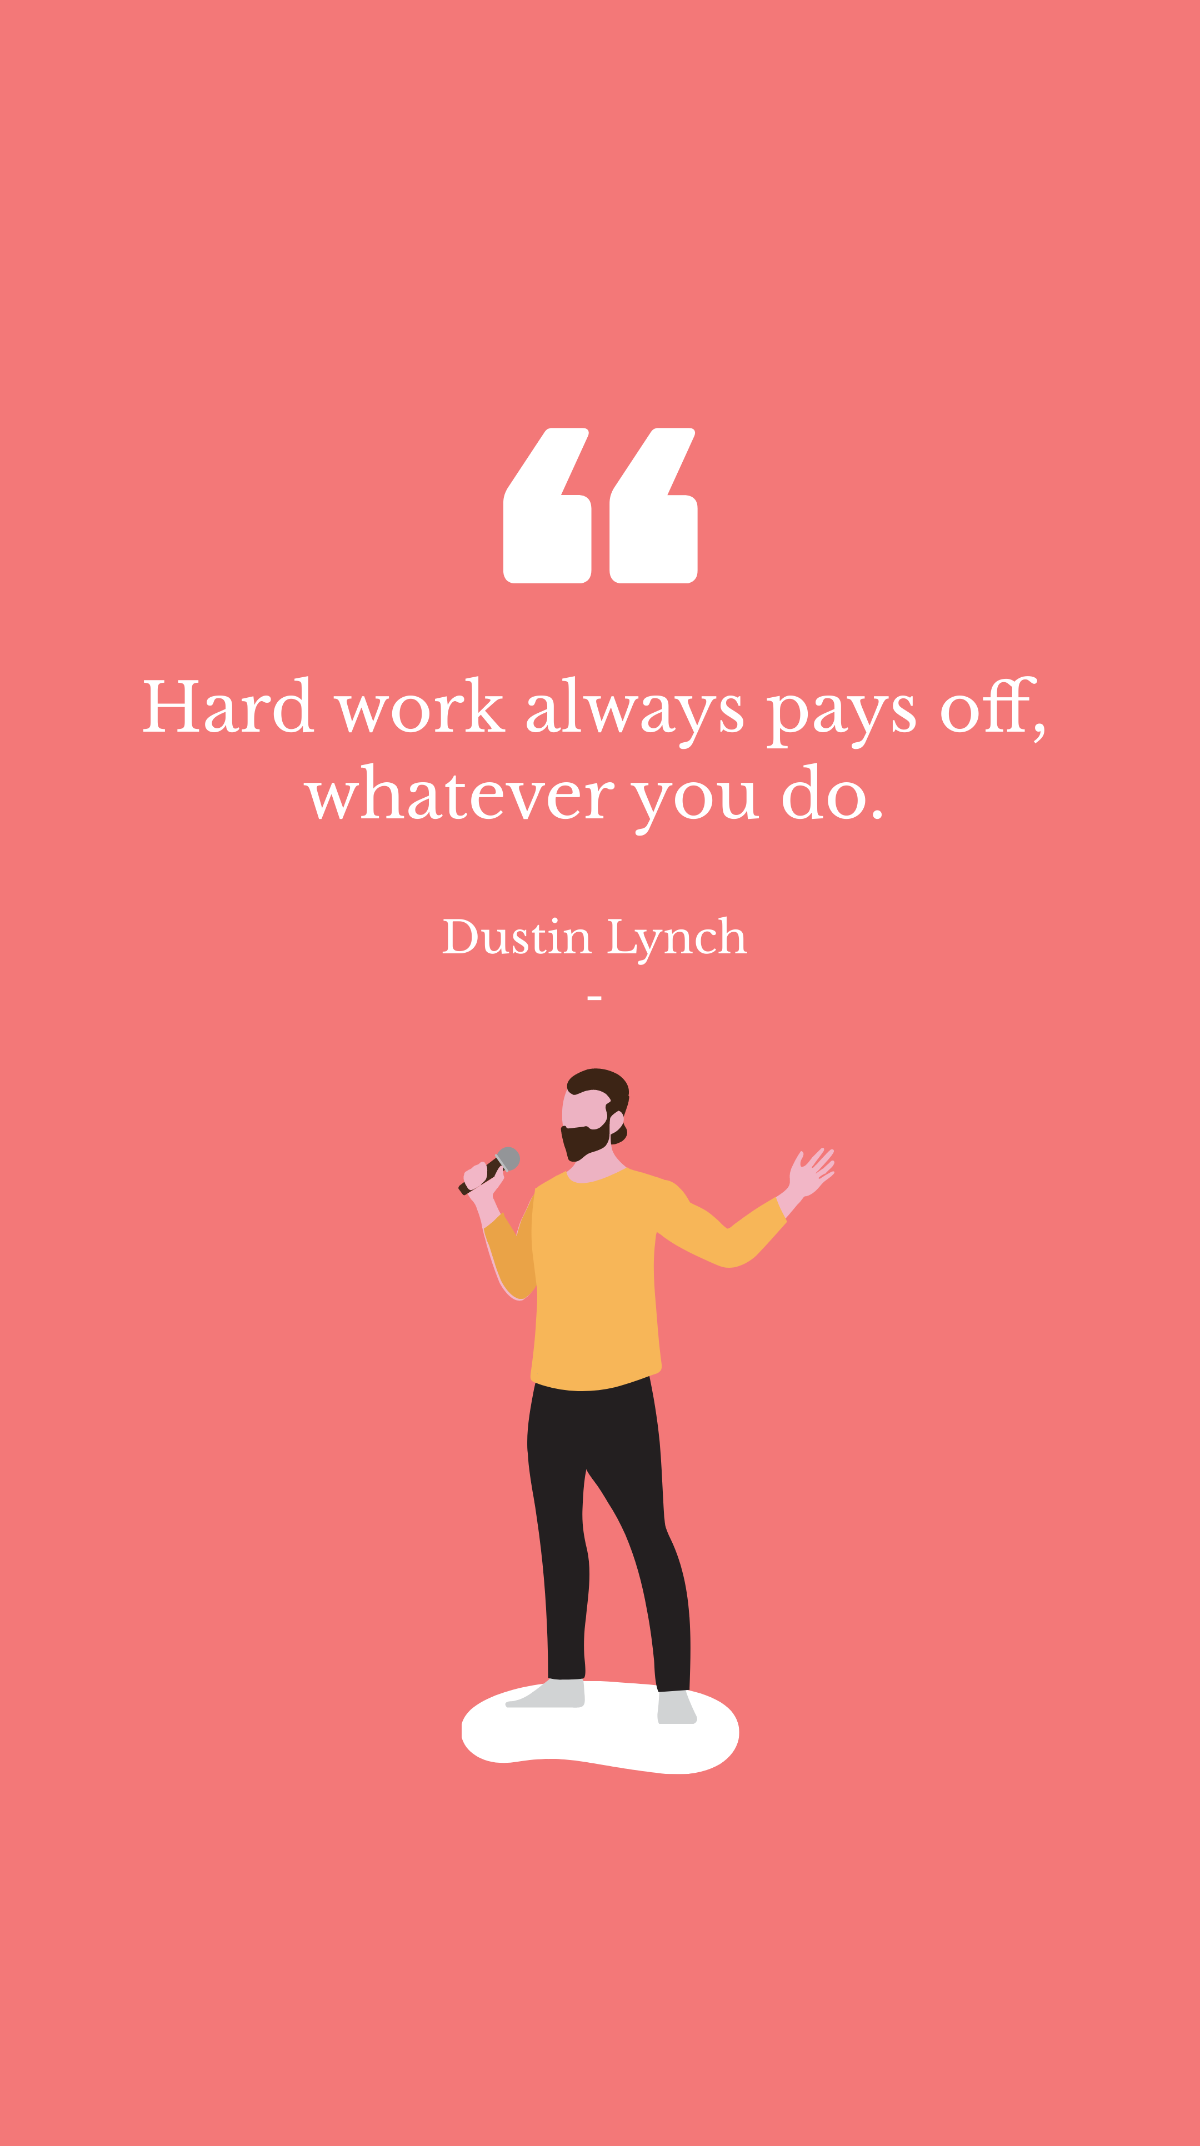 Dustin Lynch - Hard work always pays off, whatever you do. Template